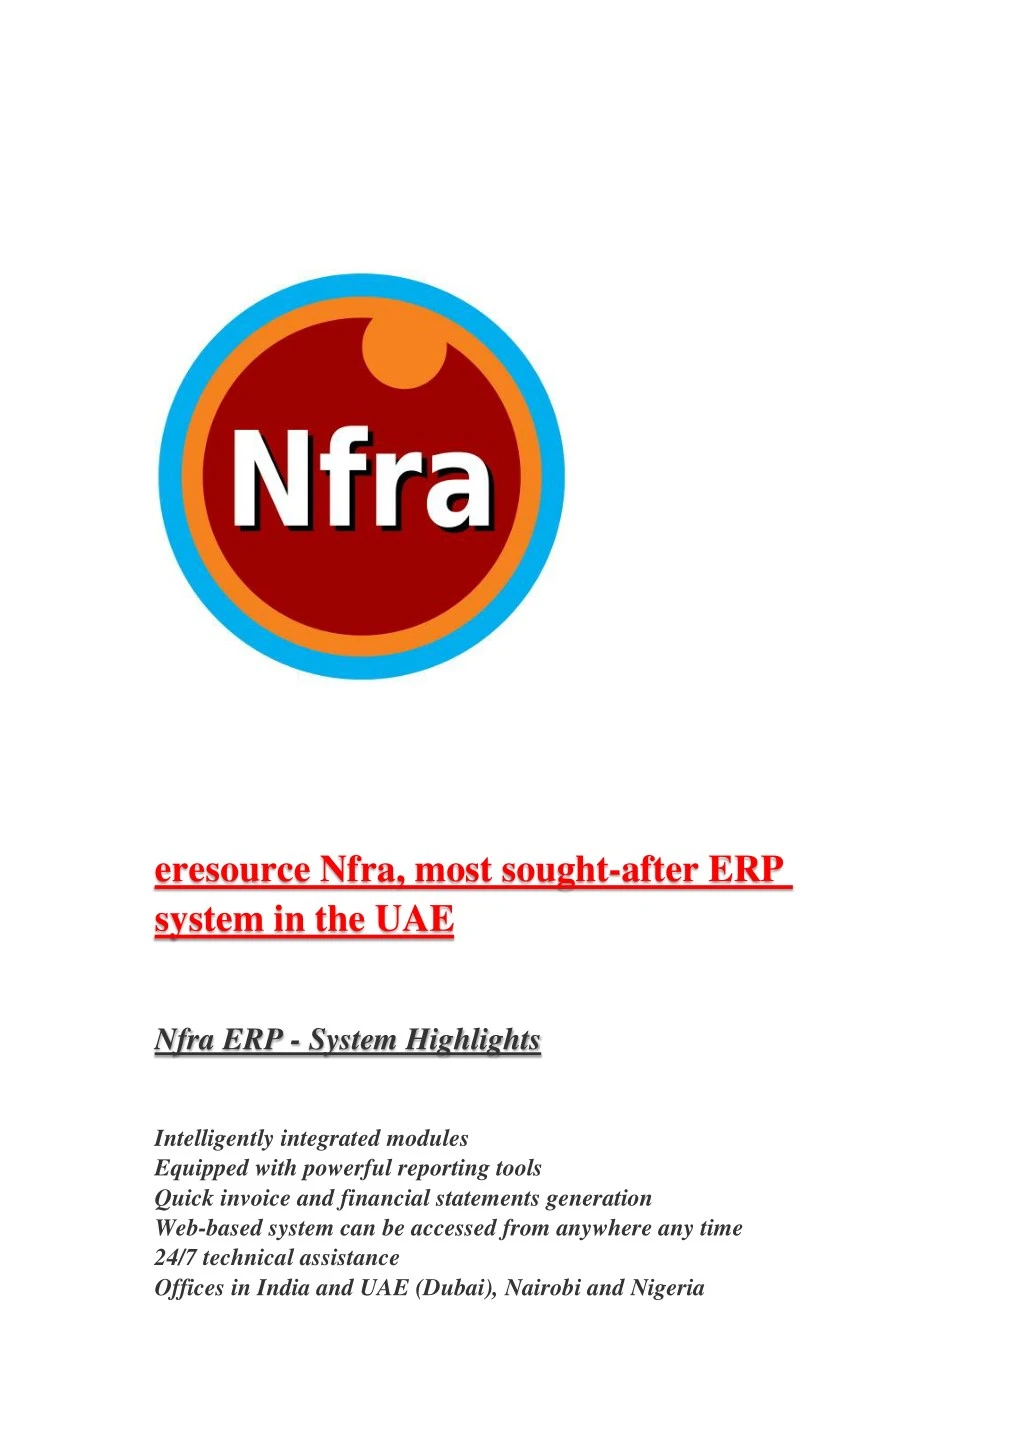 eresource nfra most sought after erp system